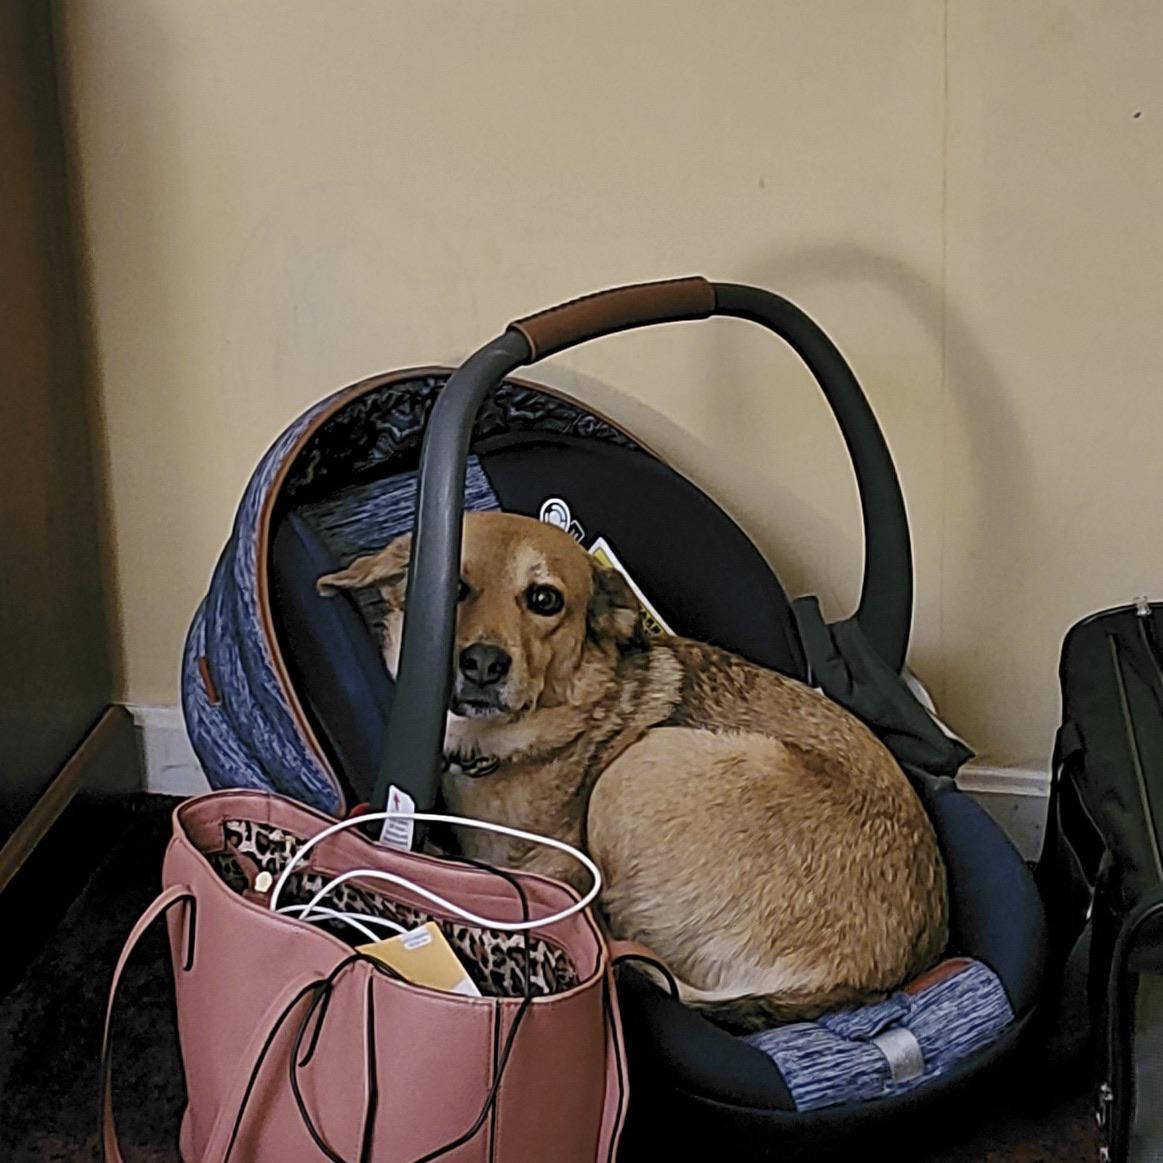 My husband and I are traveling with our baby, cat, and dog. We stopped at a hotel for the night to get some rest, and I couldn’t find my dog. I look around and see this.